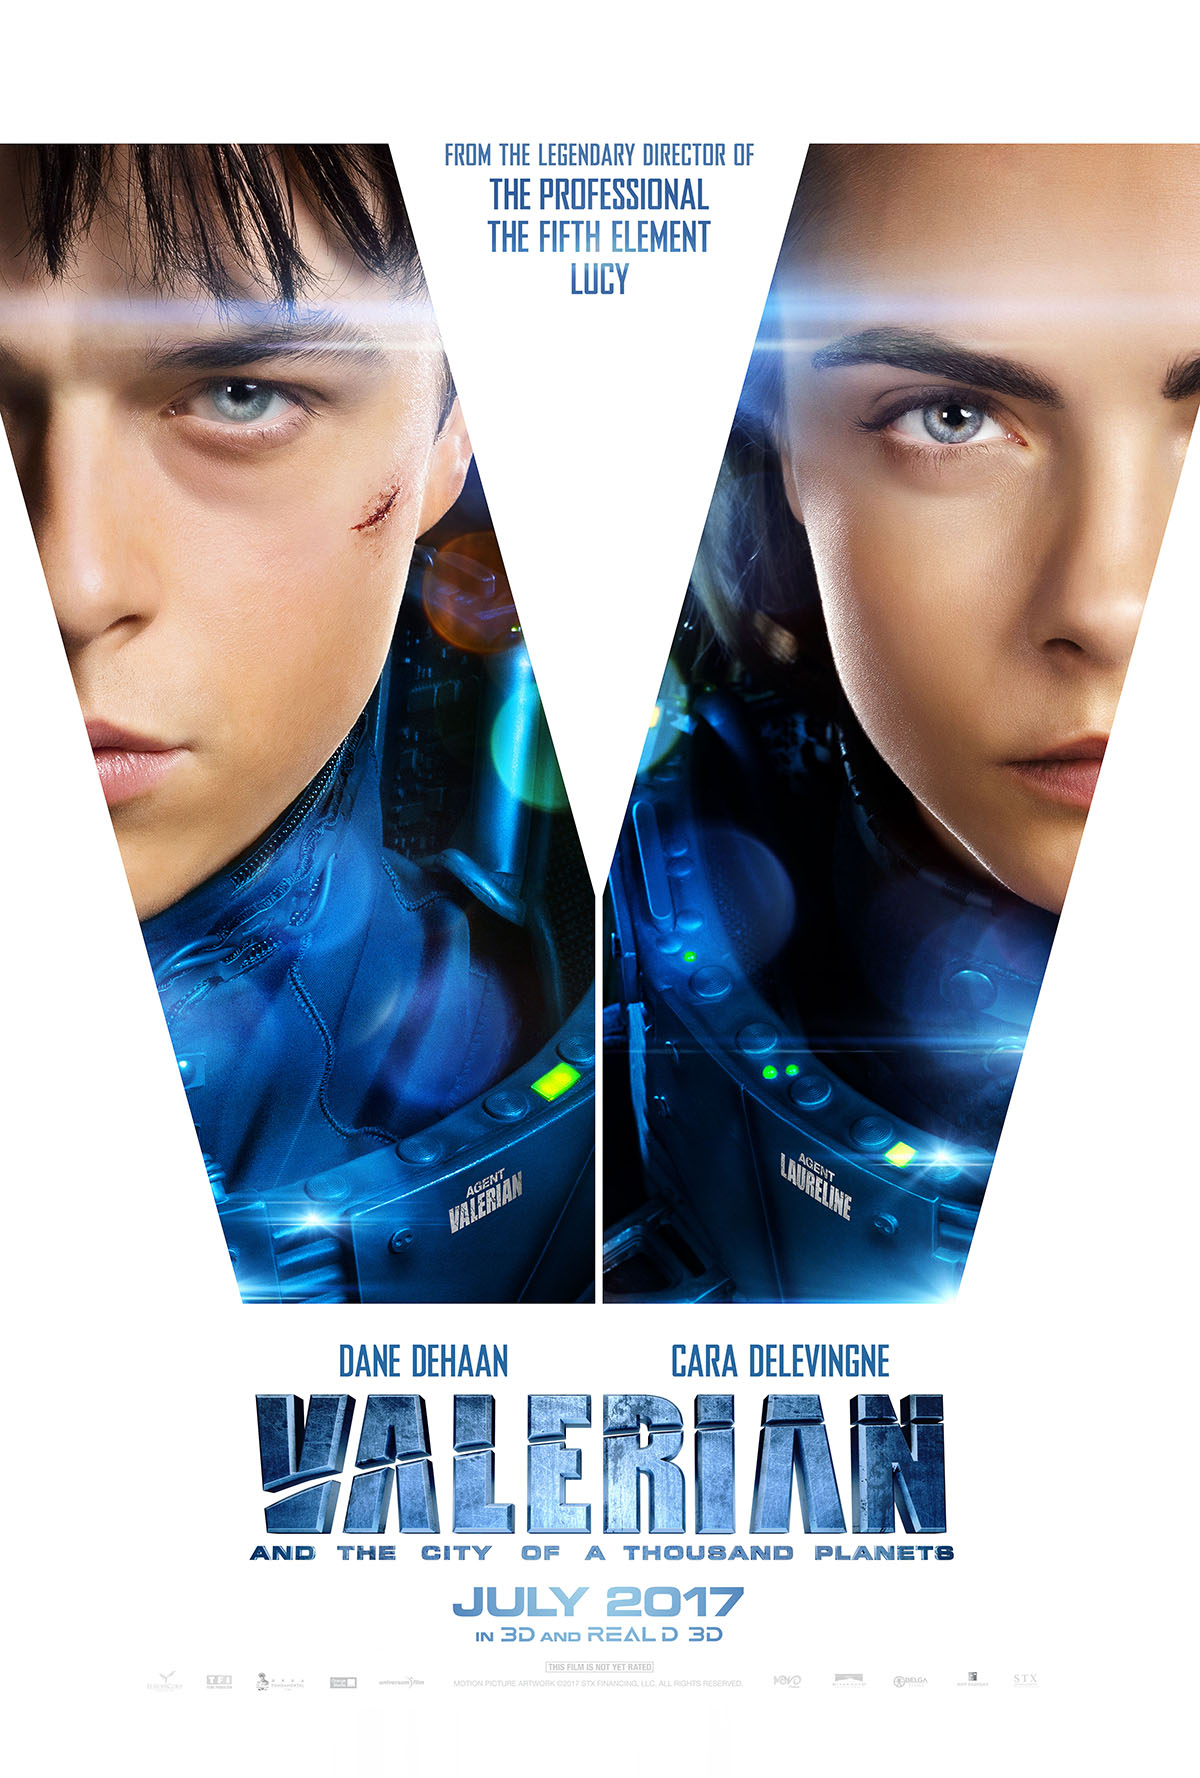 The Daily Crate | Sneak Peek: The New 'Valerian' Trailer is Here!